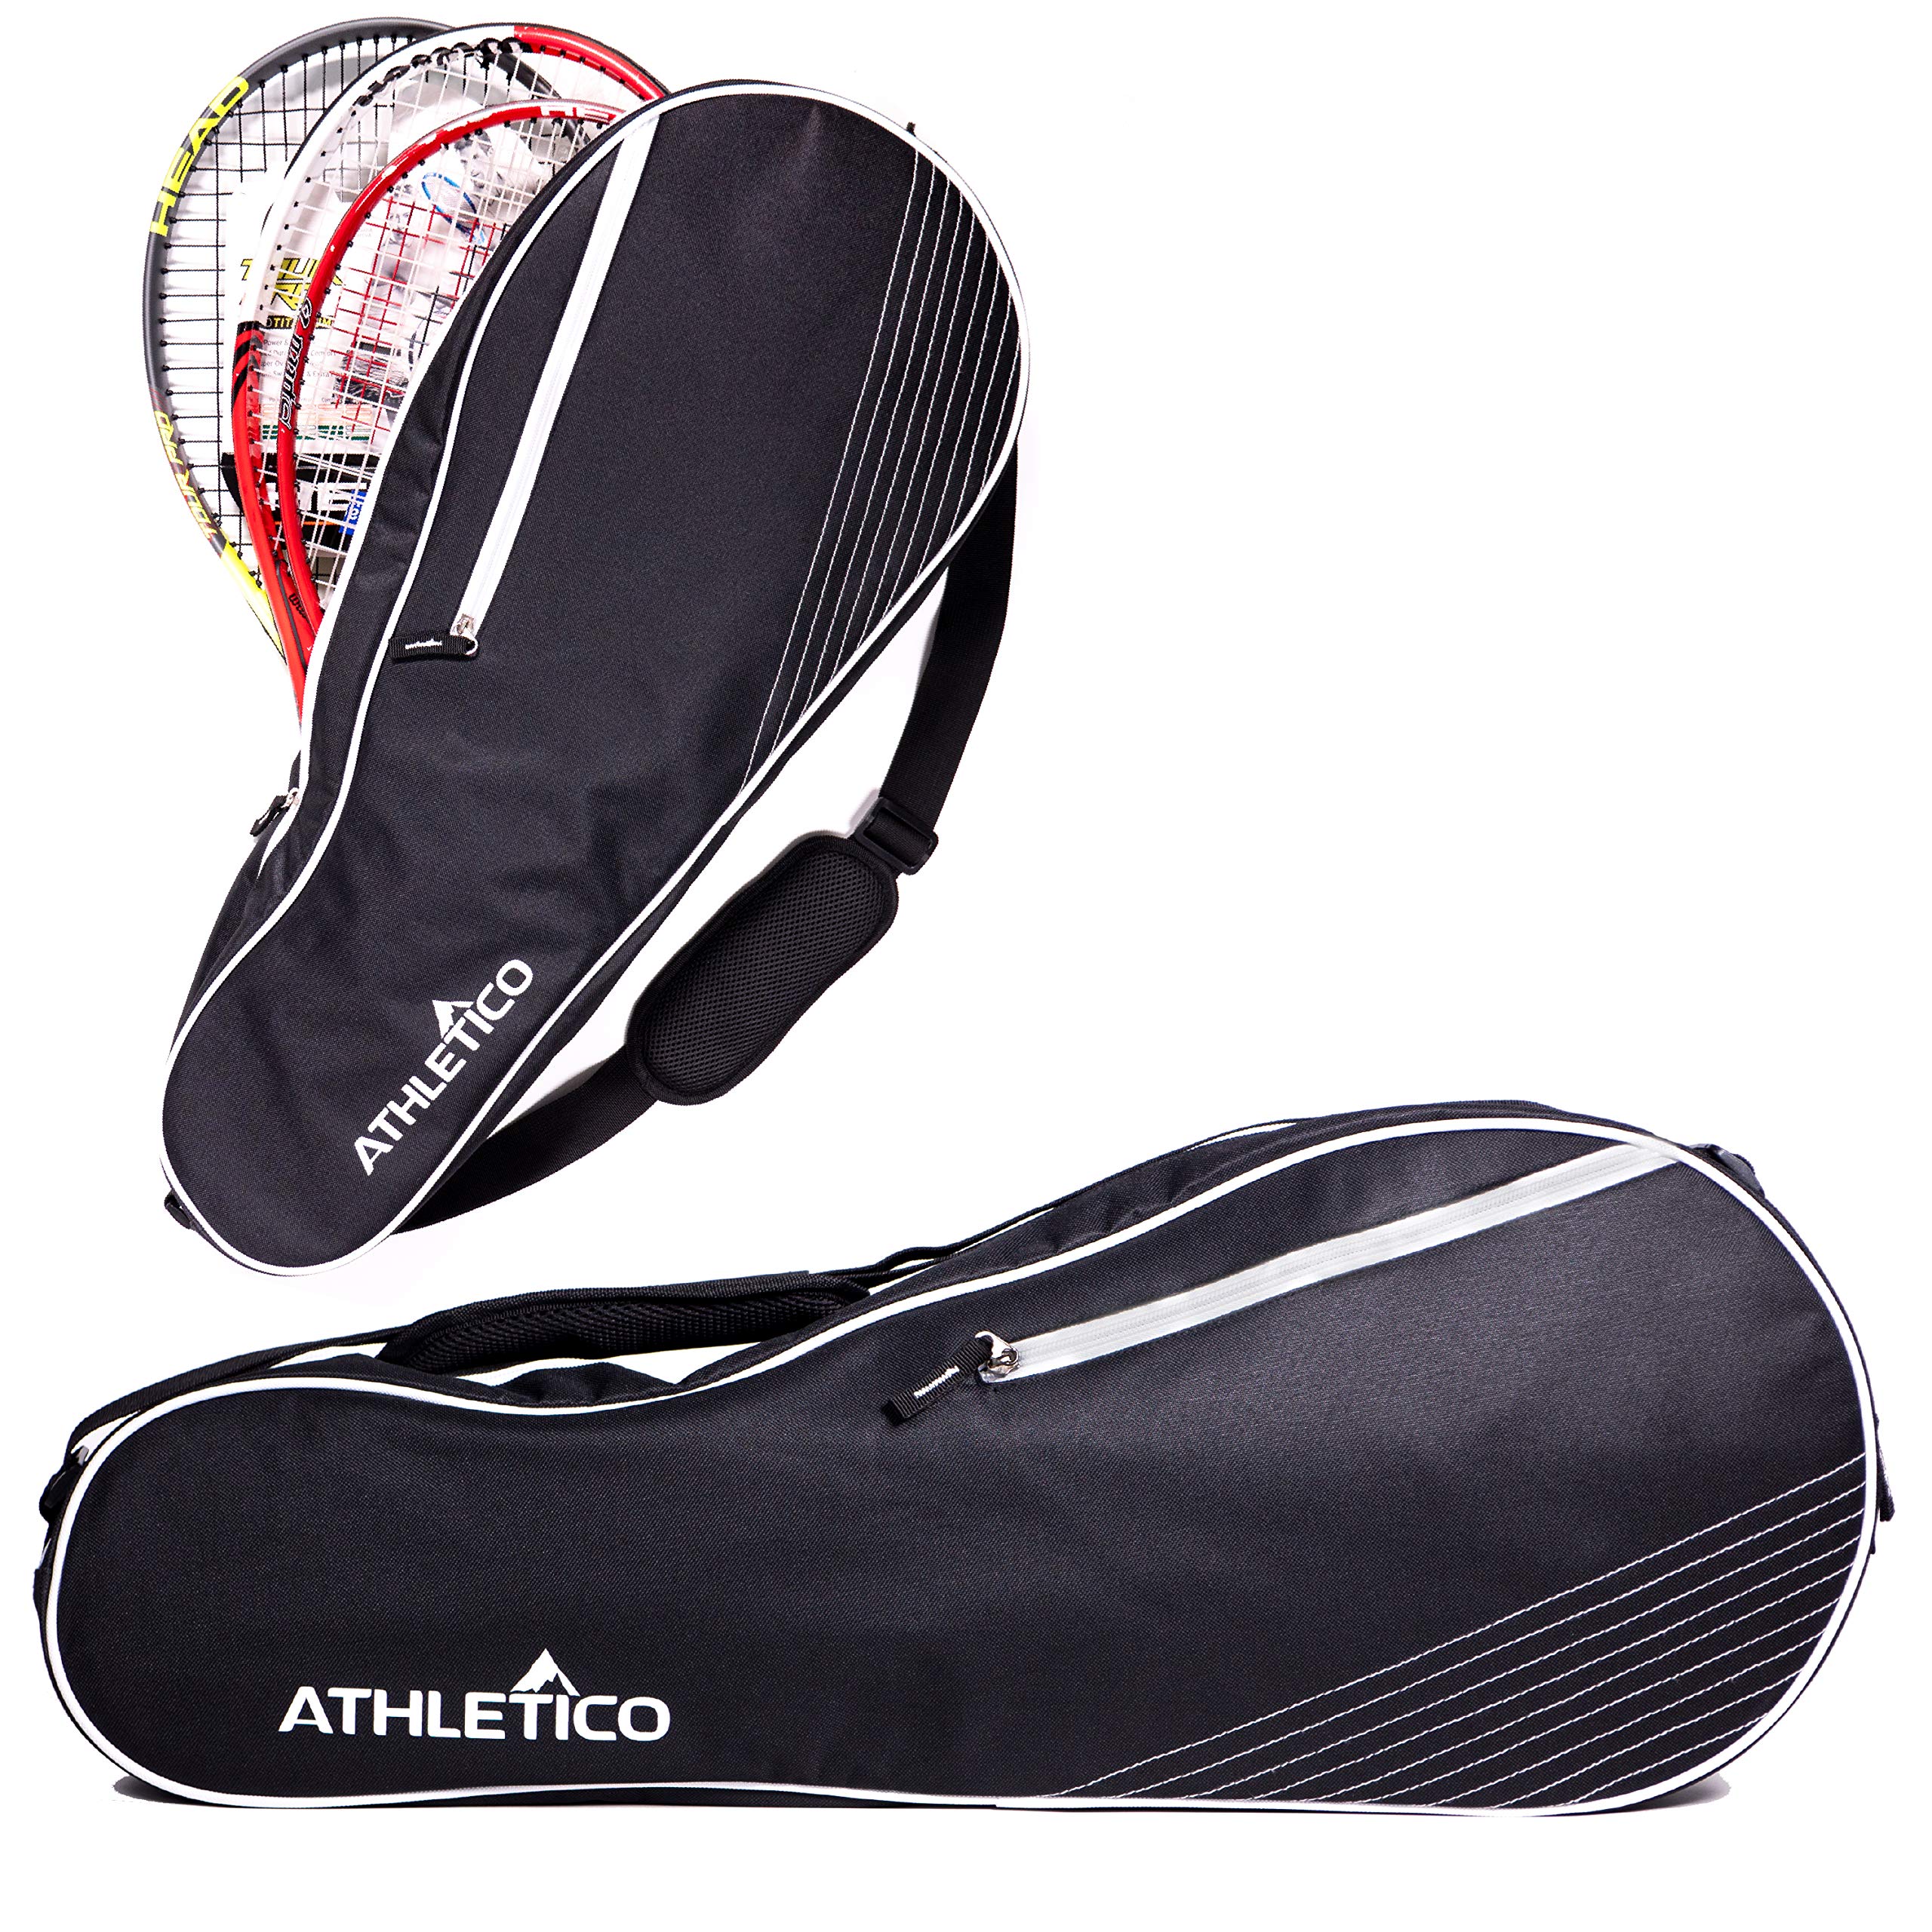 Athletico 3 Racquet Tennis Bag | Padded to Protect Rackets & Lightweight | Professional or Beginner Tennis Players | Unisex Design for Men, Women, Youth and Adults  - Like New